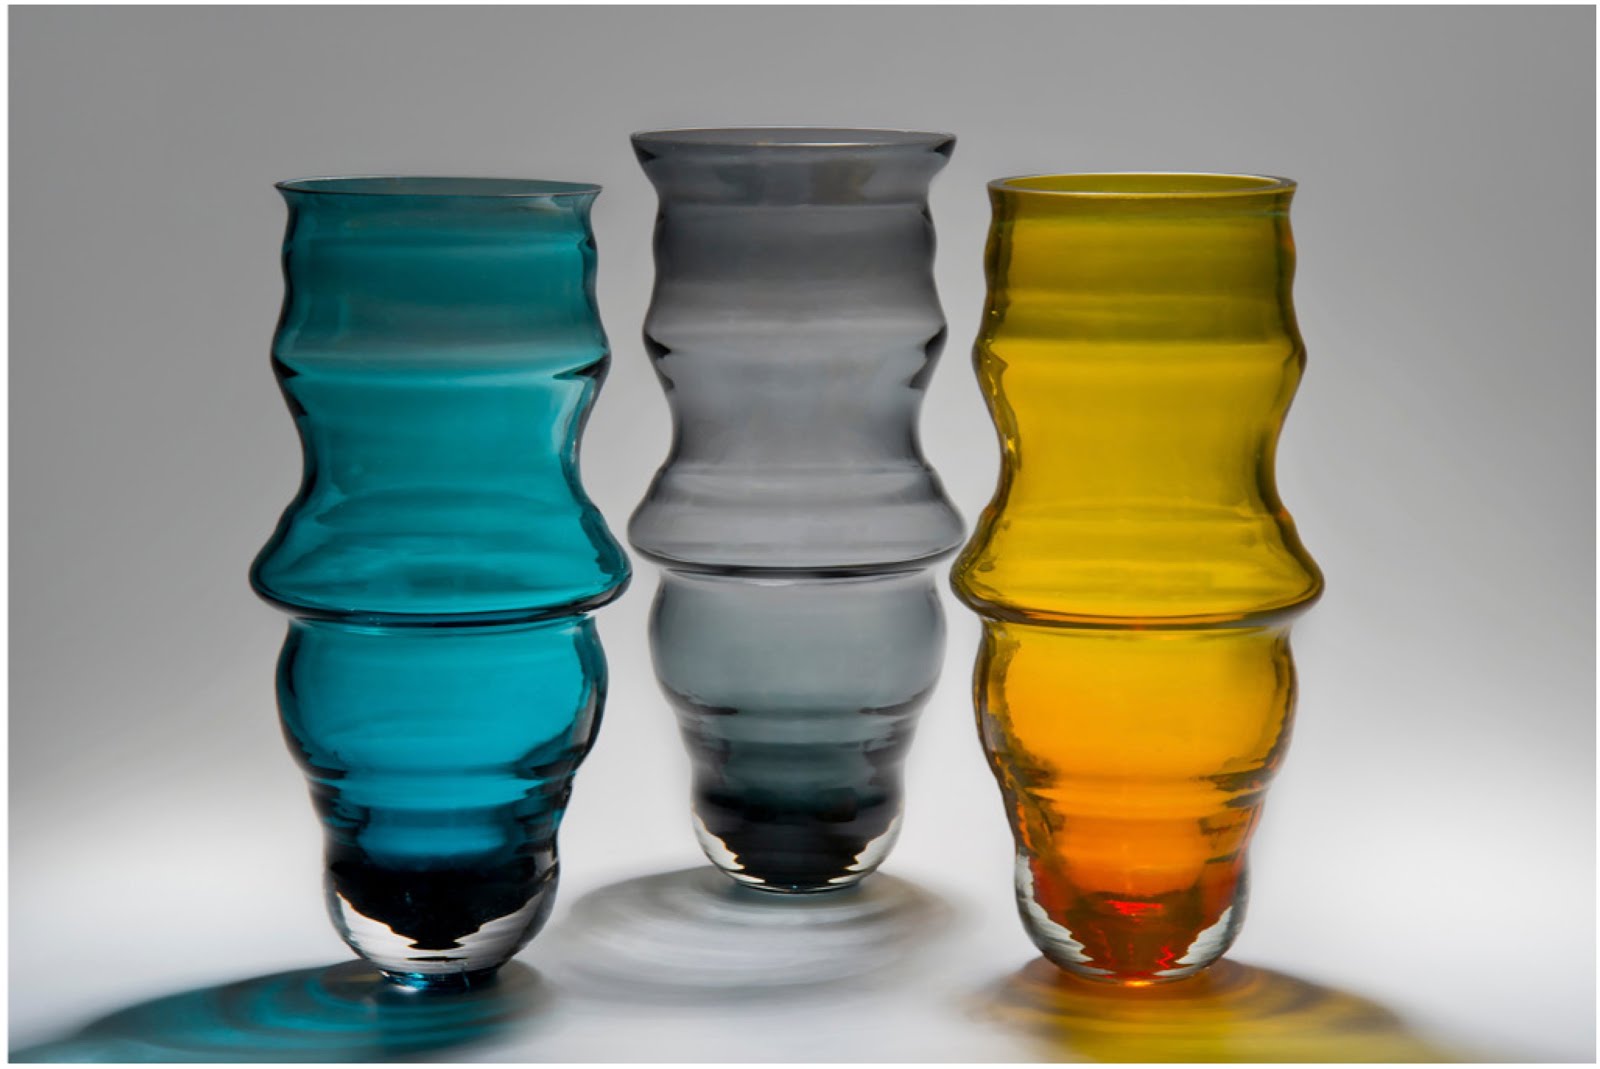 Breathe glassware collaboration by Jahday Ford and Joseph Hillary